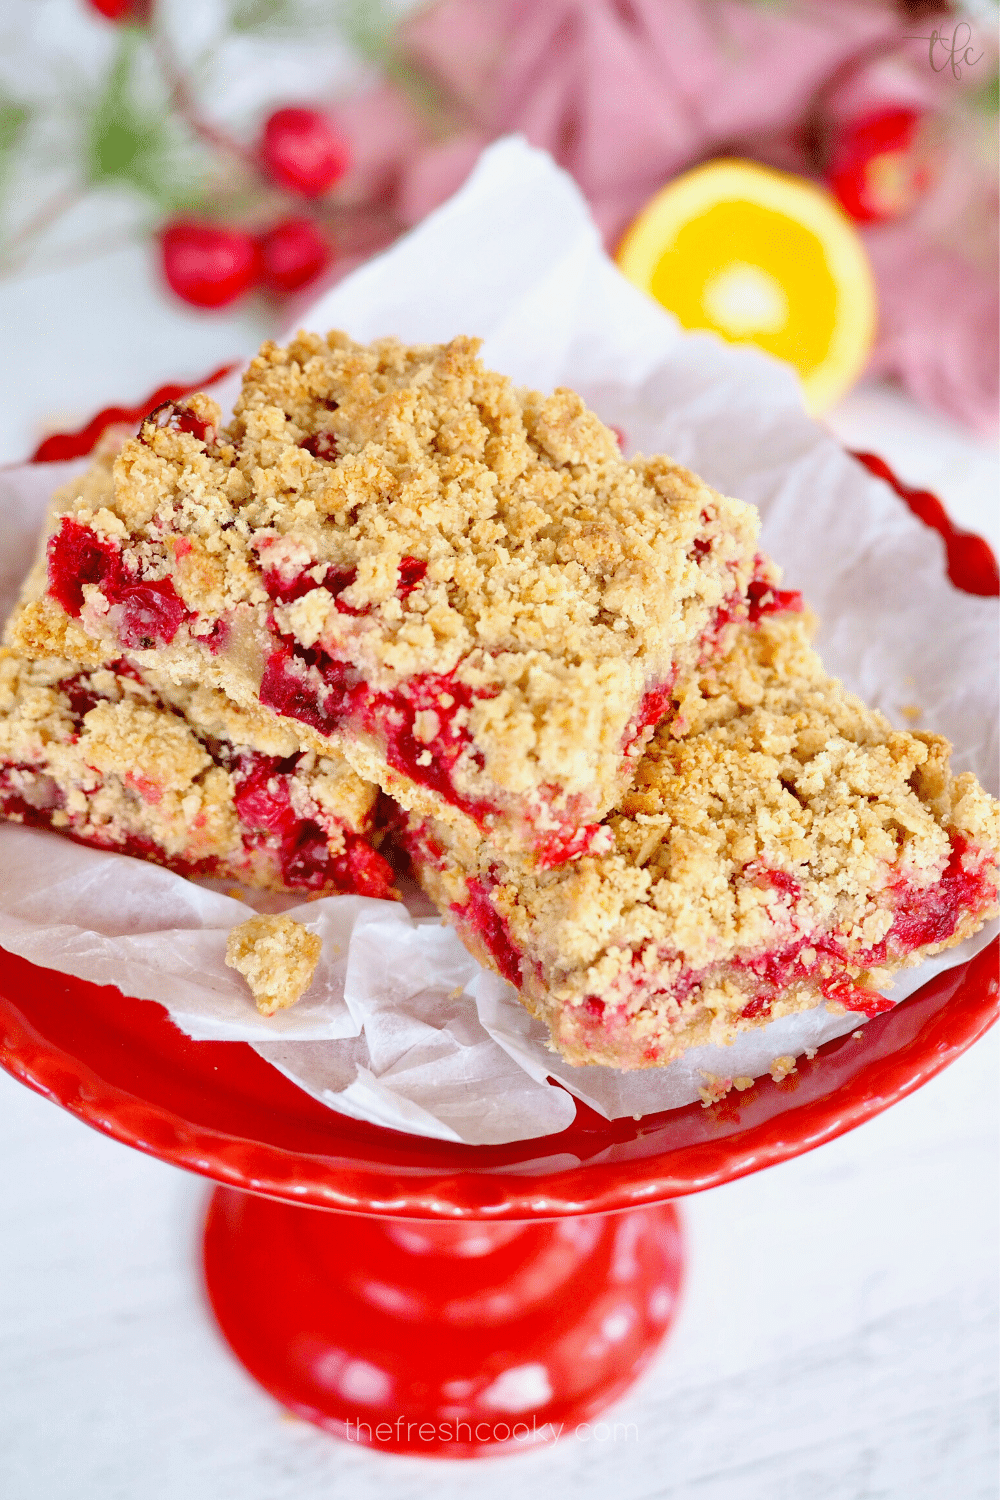 Oatmeal cranberry crunch bars on red platter.